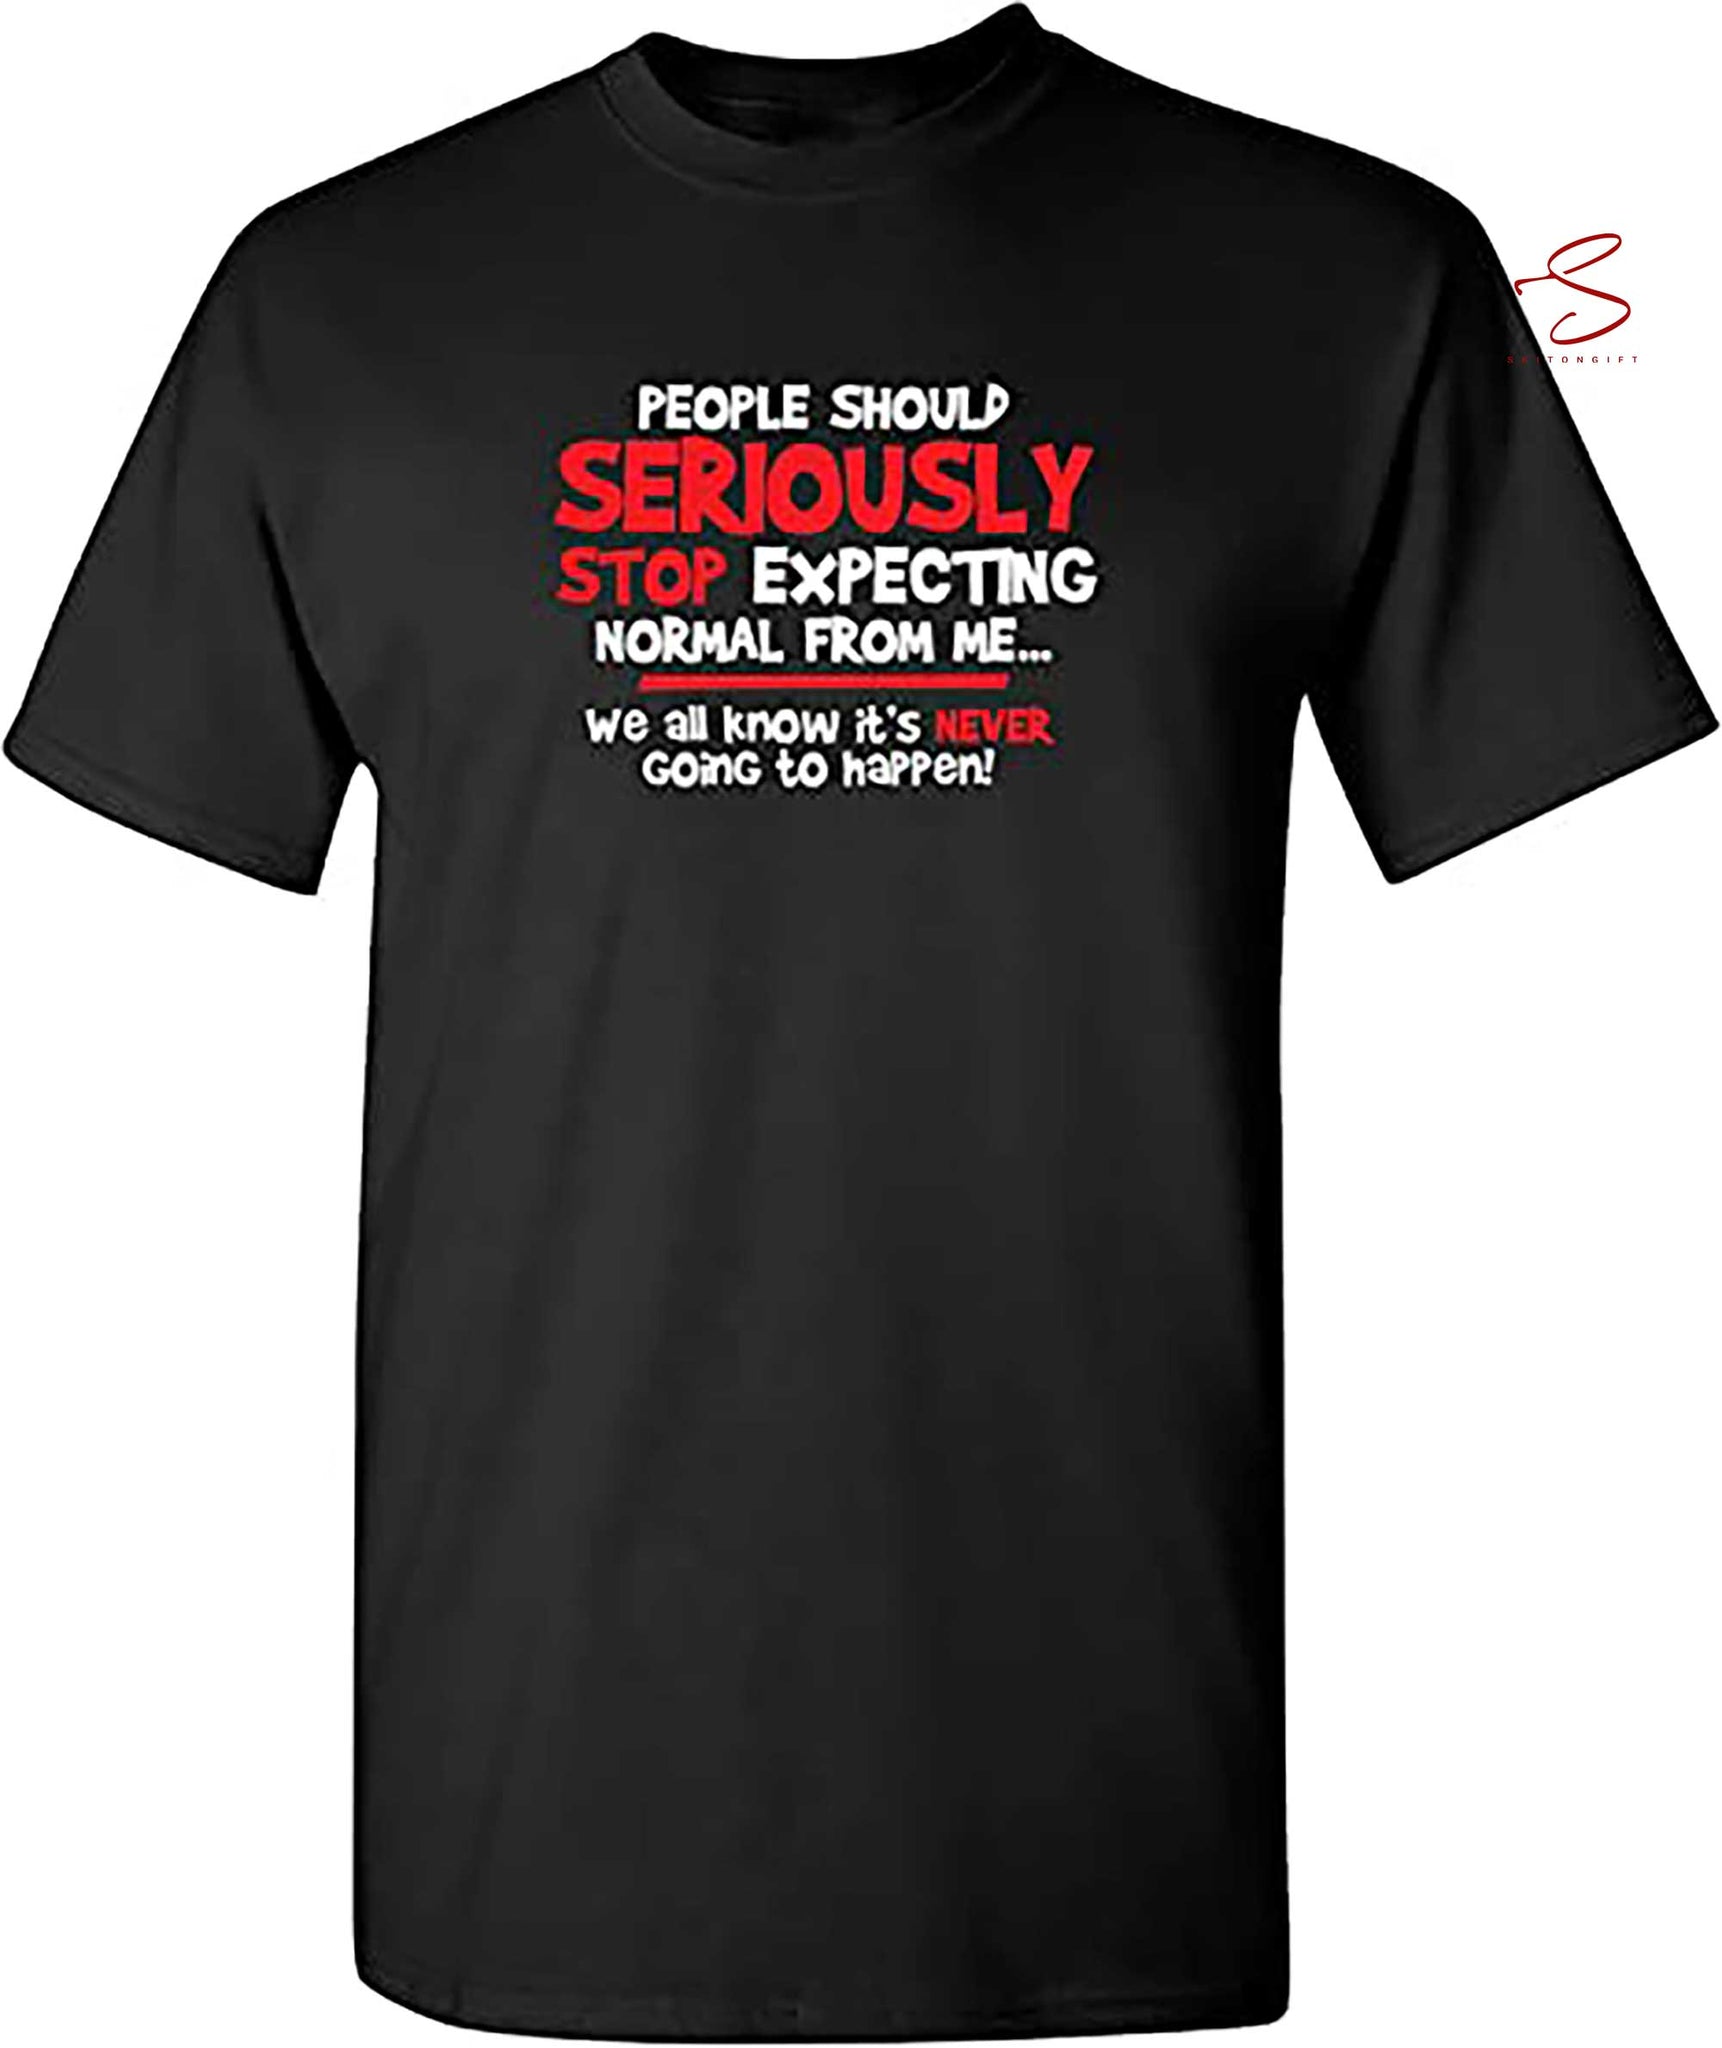 Skitongift People Should Seriously Graphic Humor Novelty Sarcastic Funny T Shirt Funny Shirts Long Sleeve Tee Hoody Hoodie